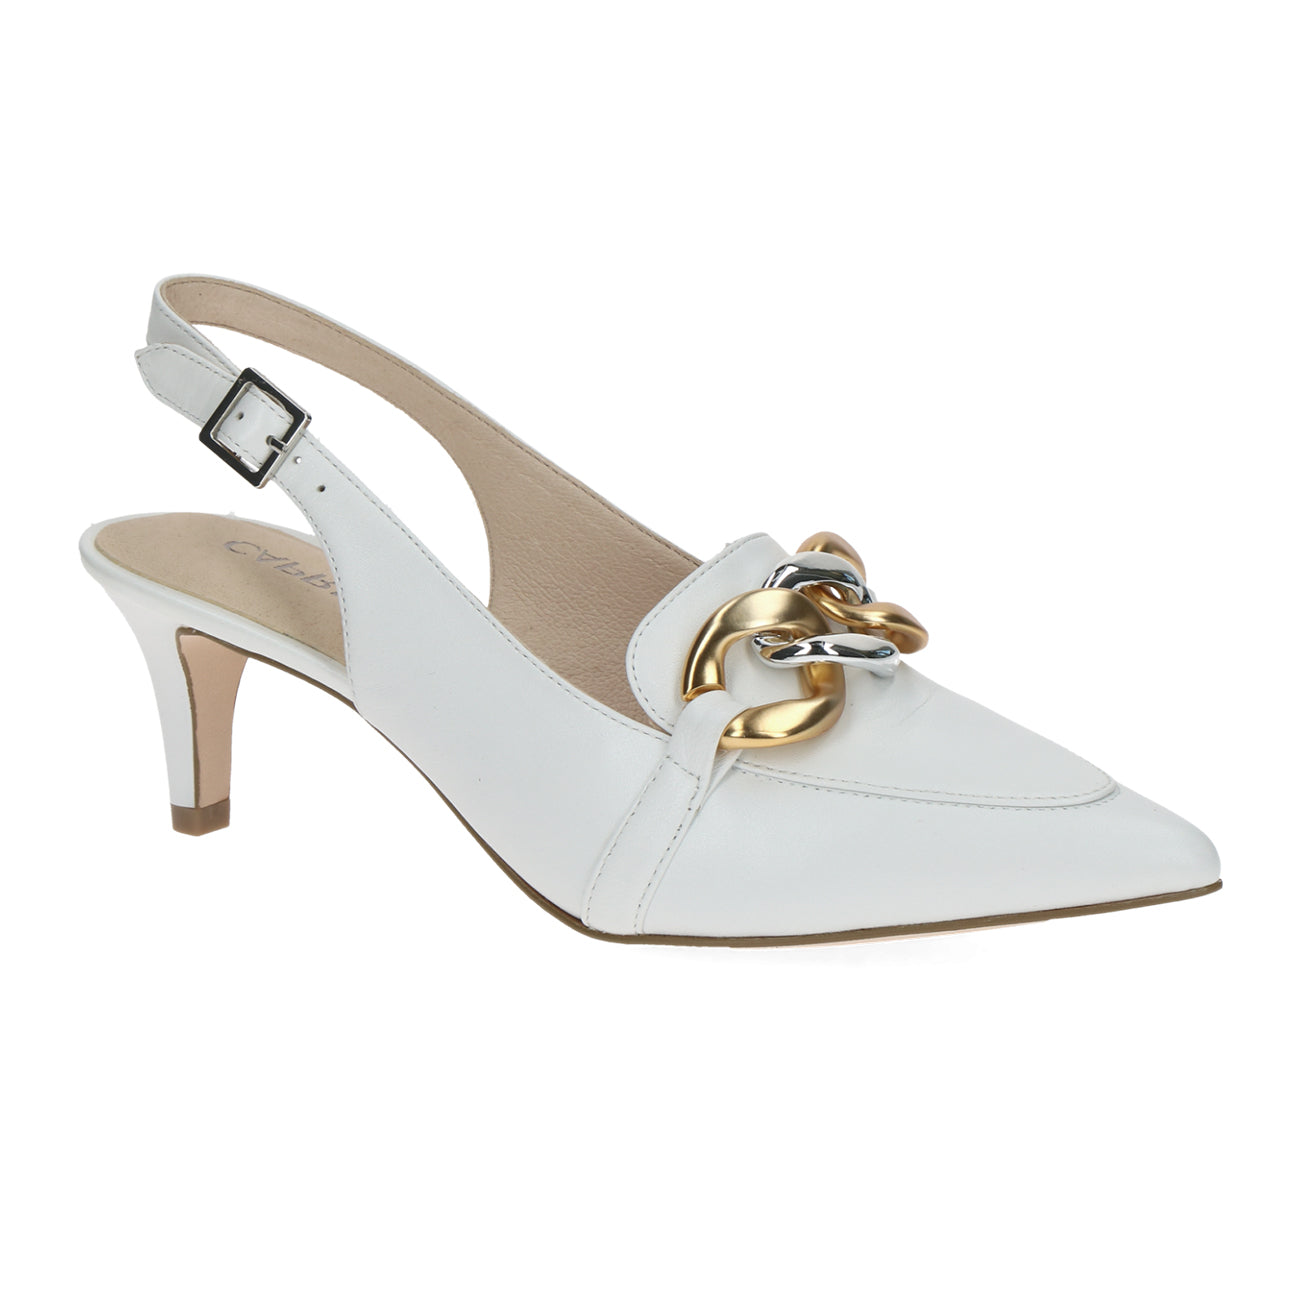 Caprice White Perlato Leather Sling Back with a Mid Heel and chain front.